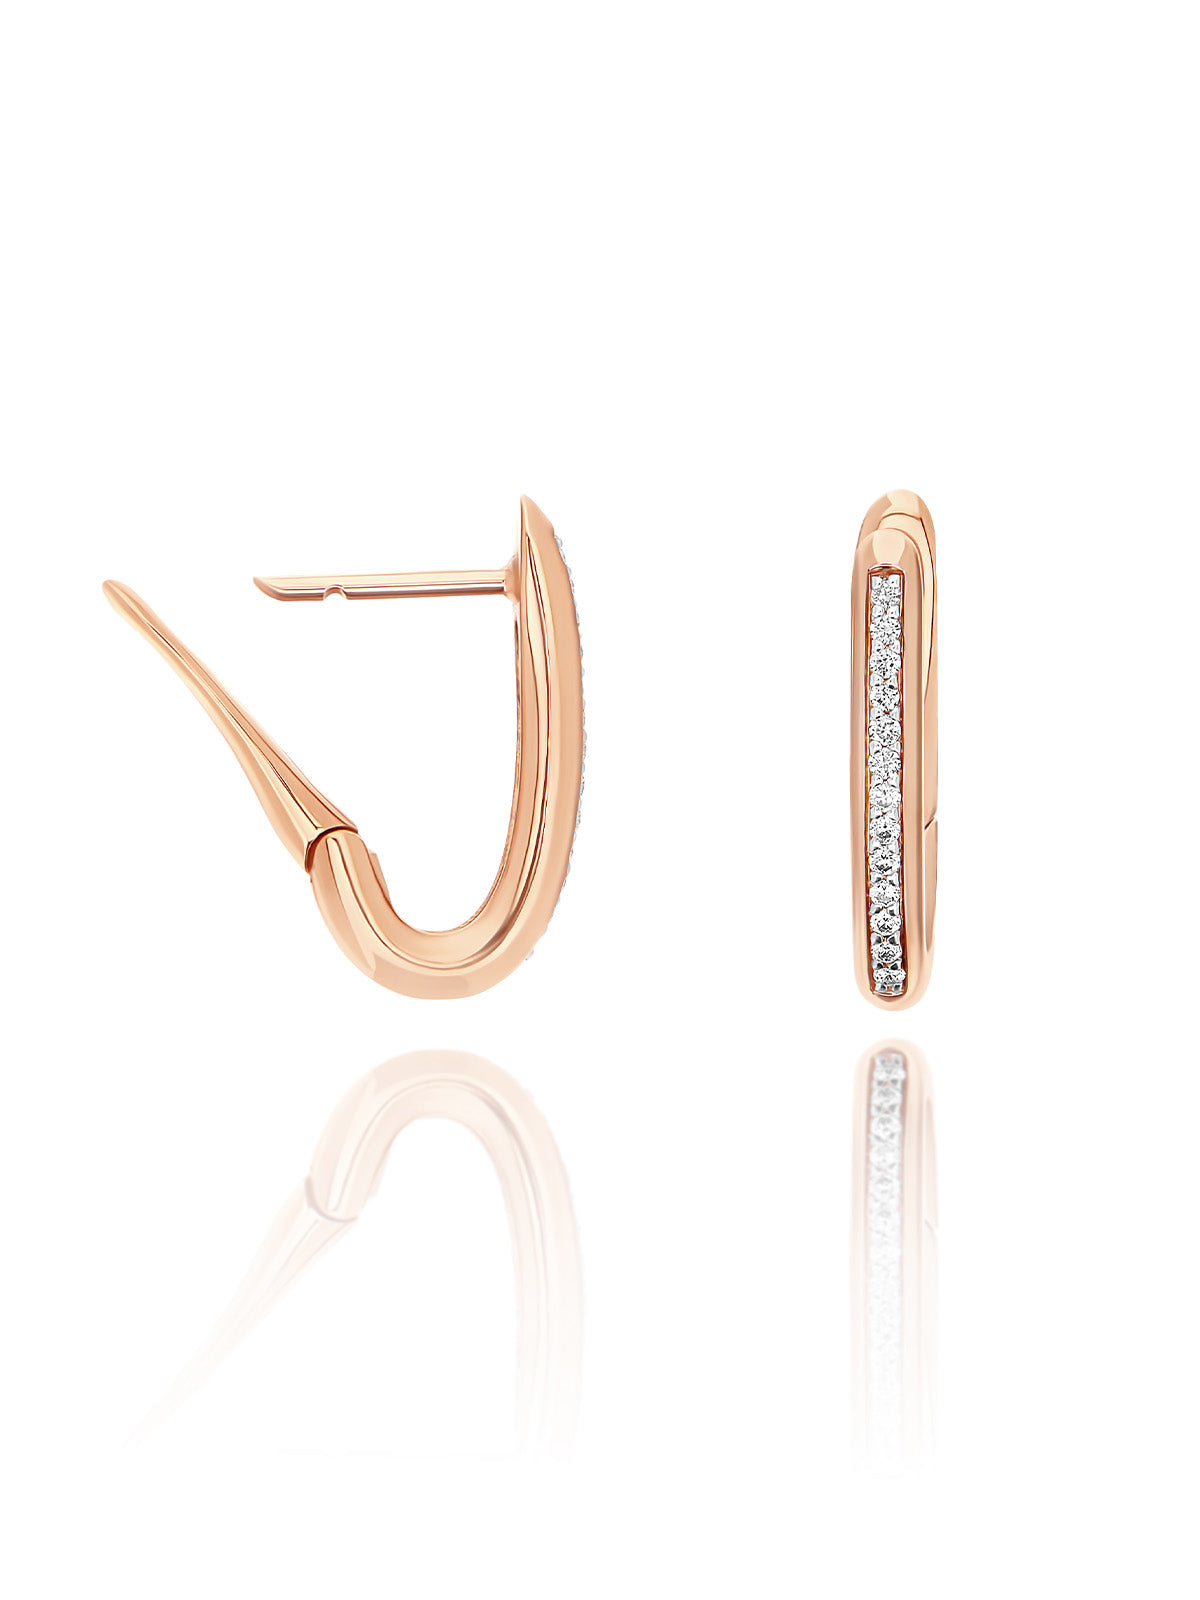 "Libera" small rose gold square hoop earrings with diamonds